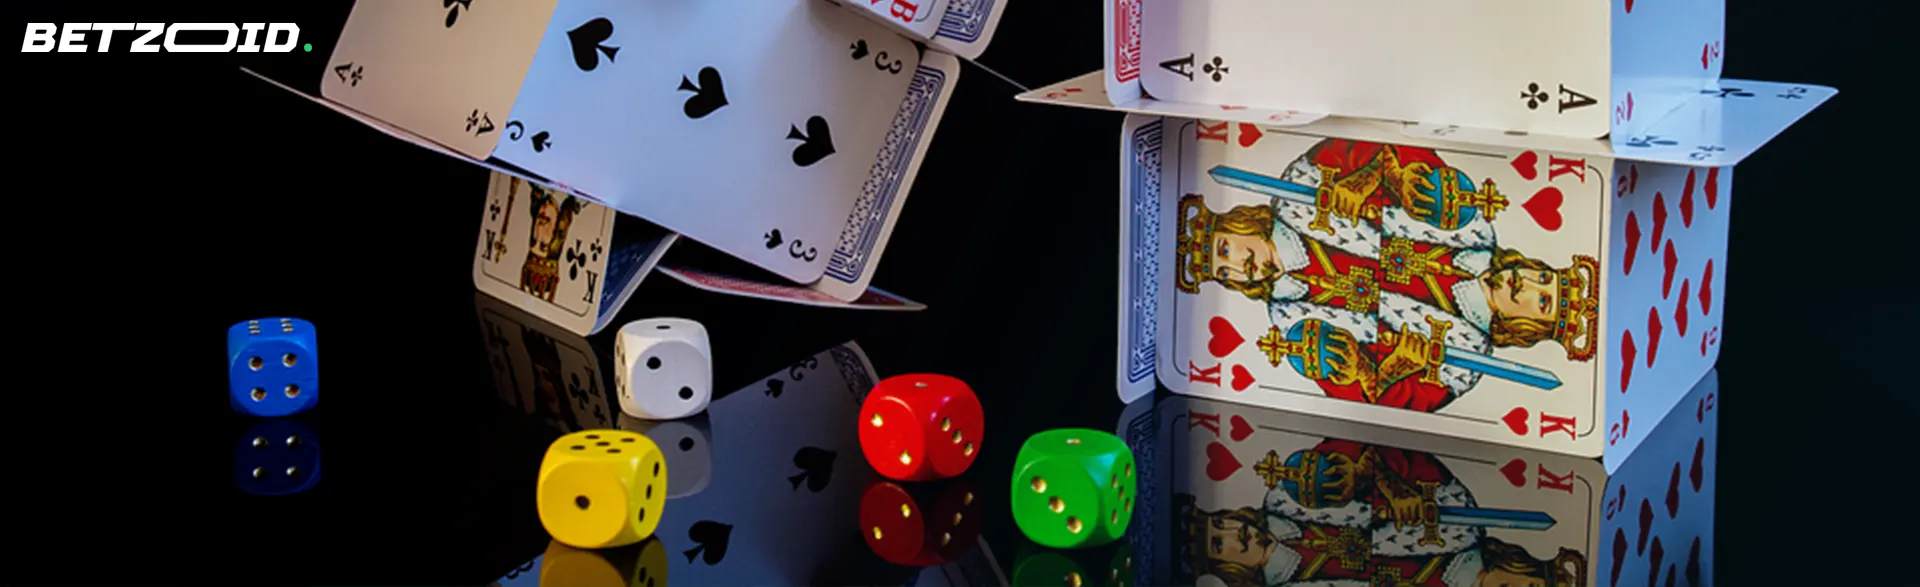 A card house with kings and aces, surrounded by colorful dice on a dark background.